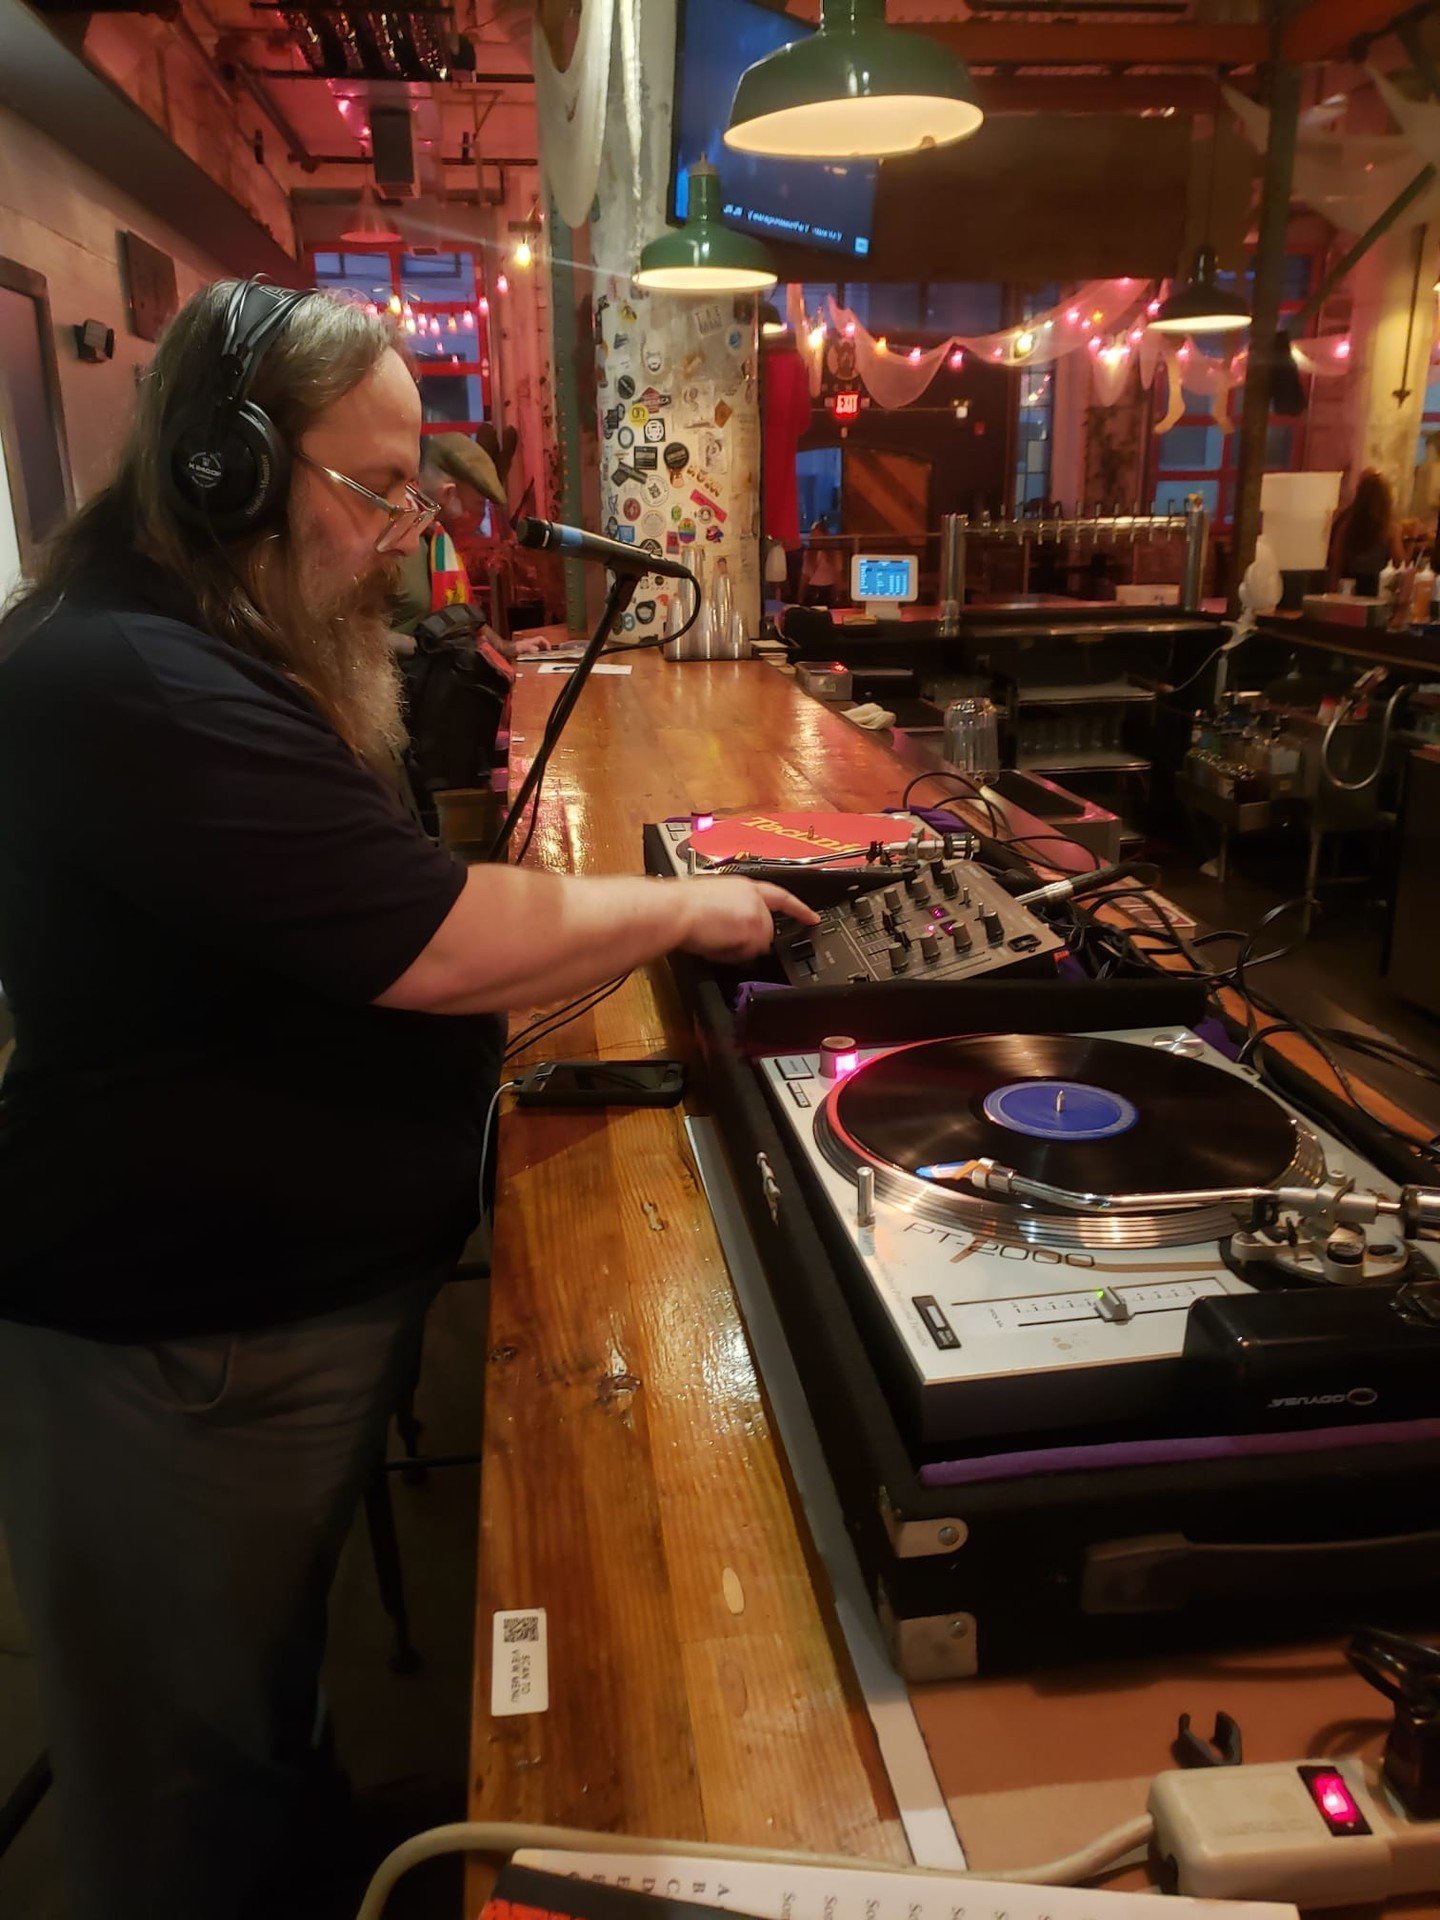 It's time for your favorite quizzo night! 🎶🎧DJ Quizzo is every first Wednesday of the month at 7pm. Listen to music, answer questions, win prizes! Hosted by your favorite music nerd @liebesfuss See you there!